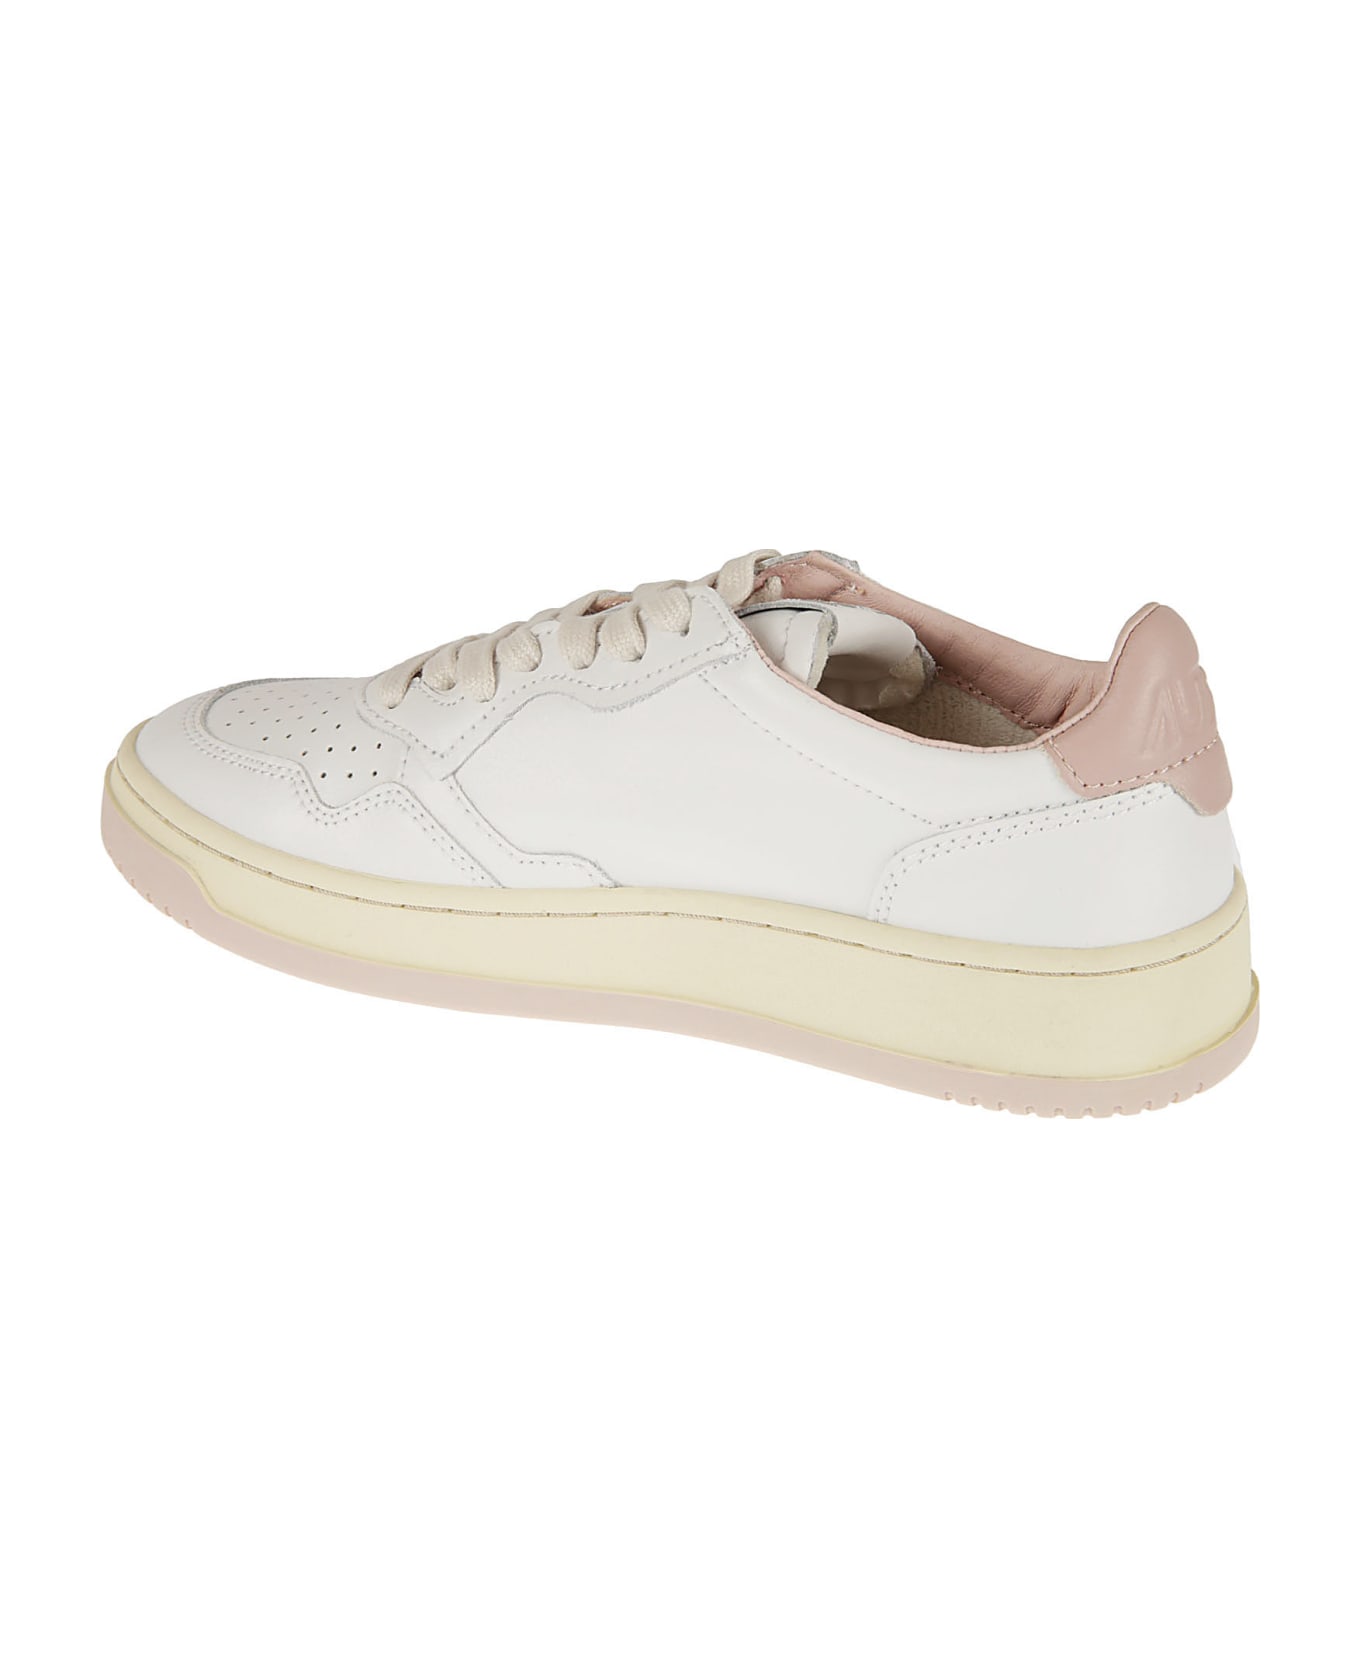 Autry Logo Patched Sneakers - White